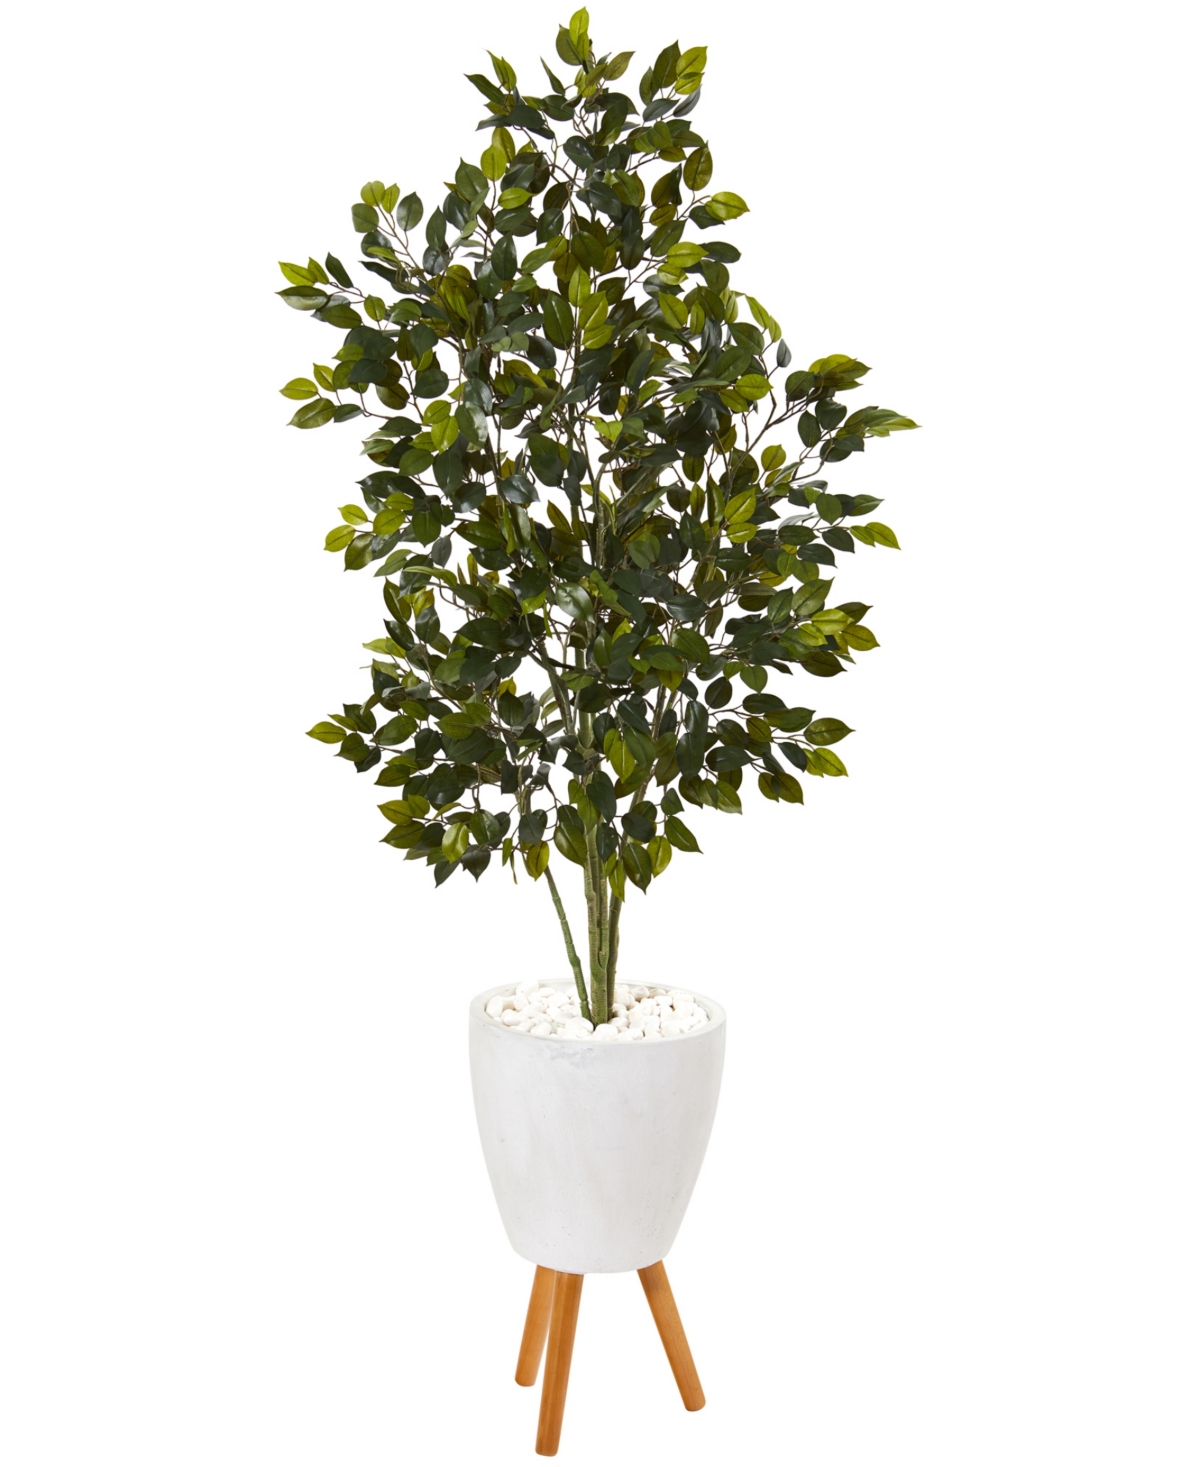 5ft. Ficus Artificial Tree in White Planter with Stand - Green